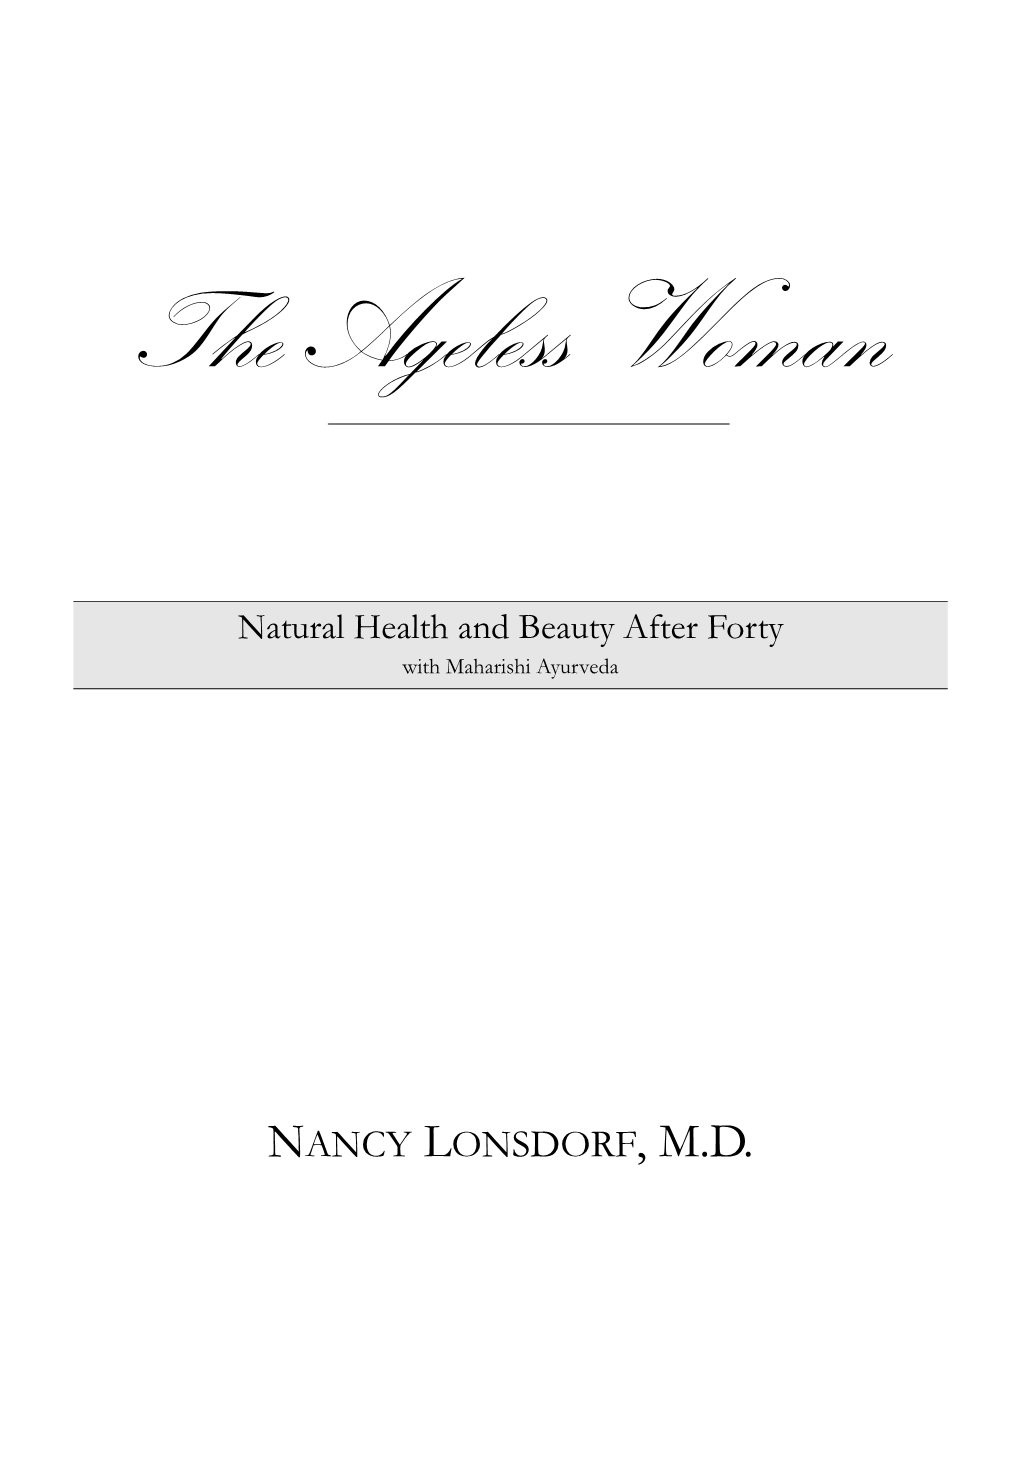 The Ageless Woman.Book